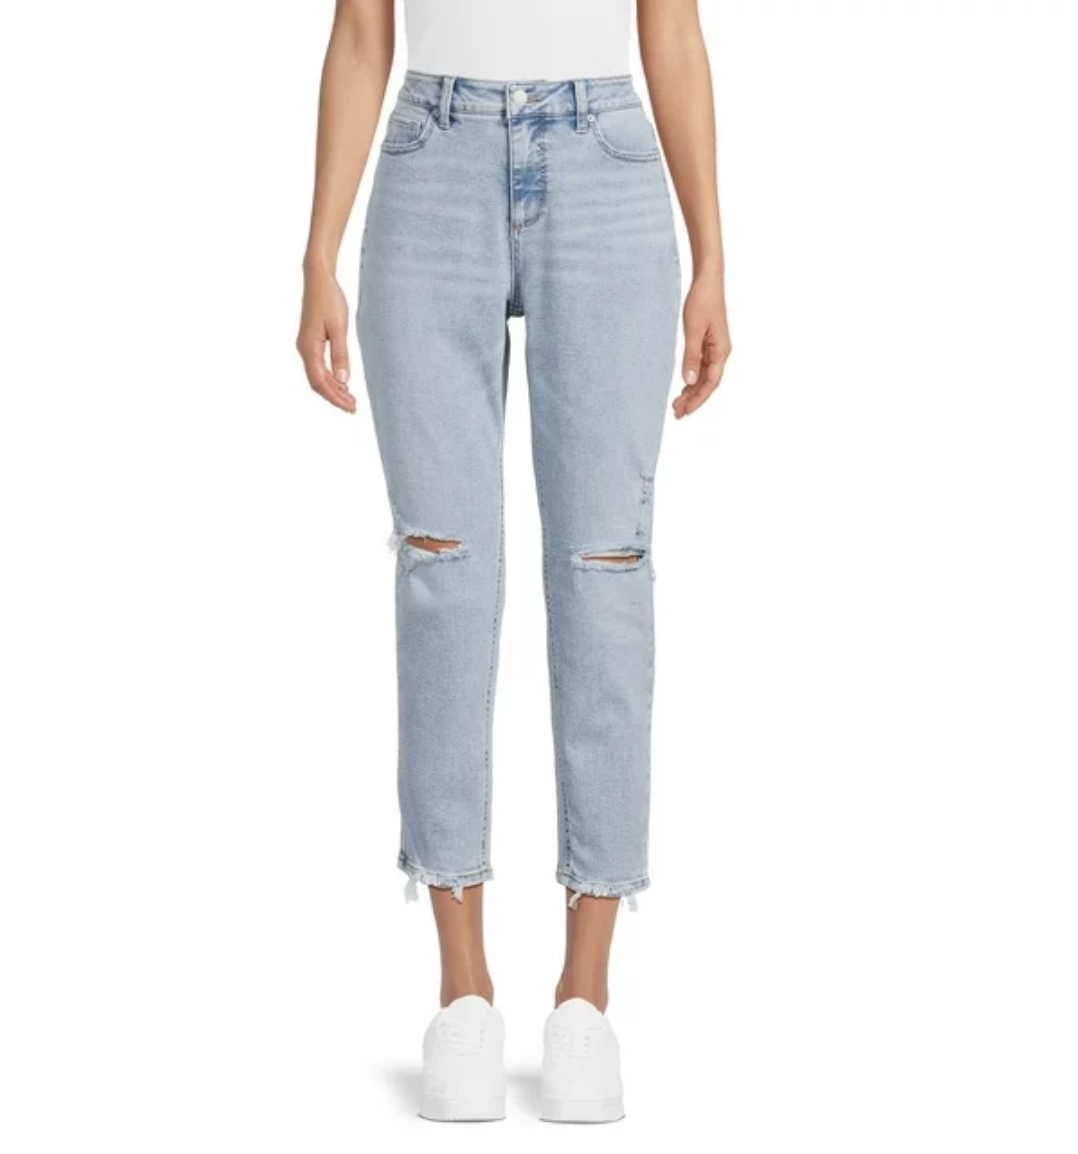 A pair of cropped distressed light wash jeans